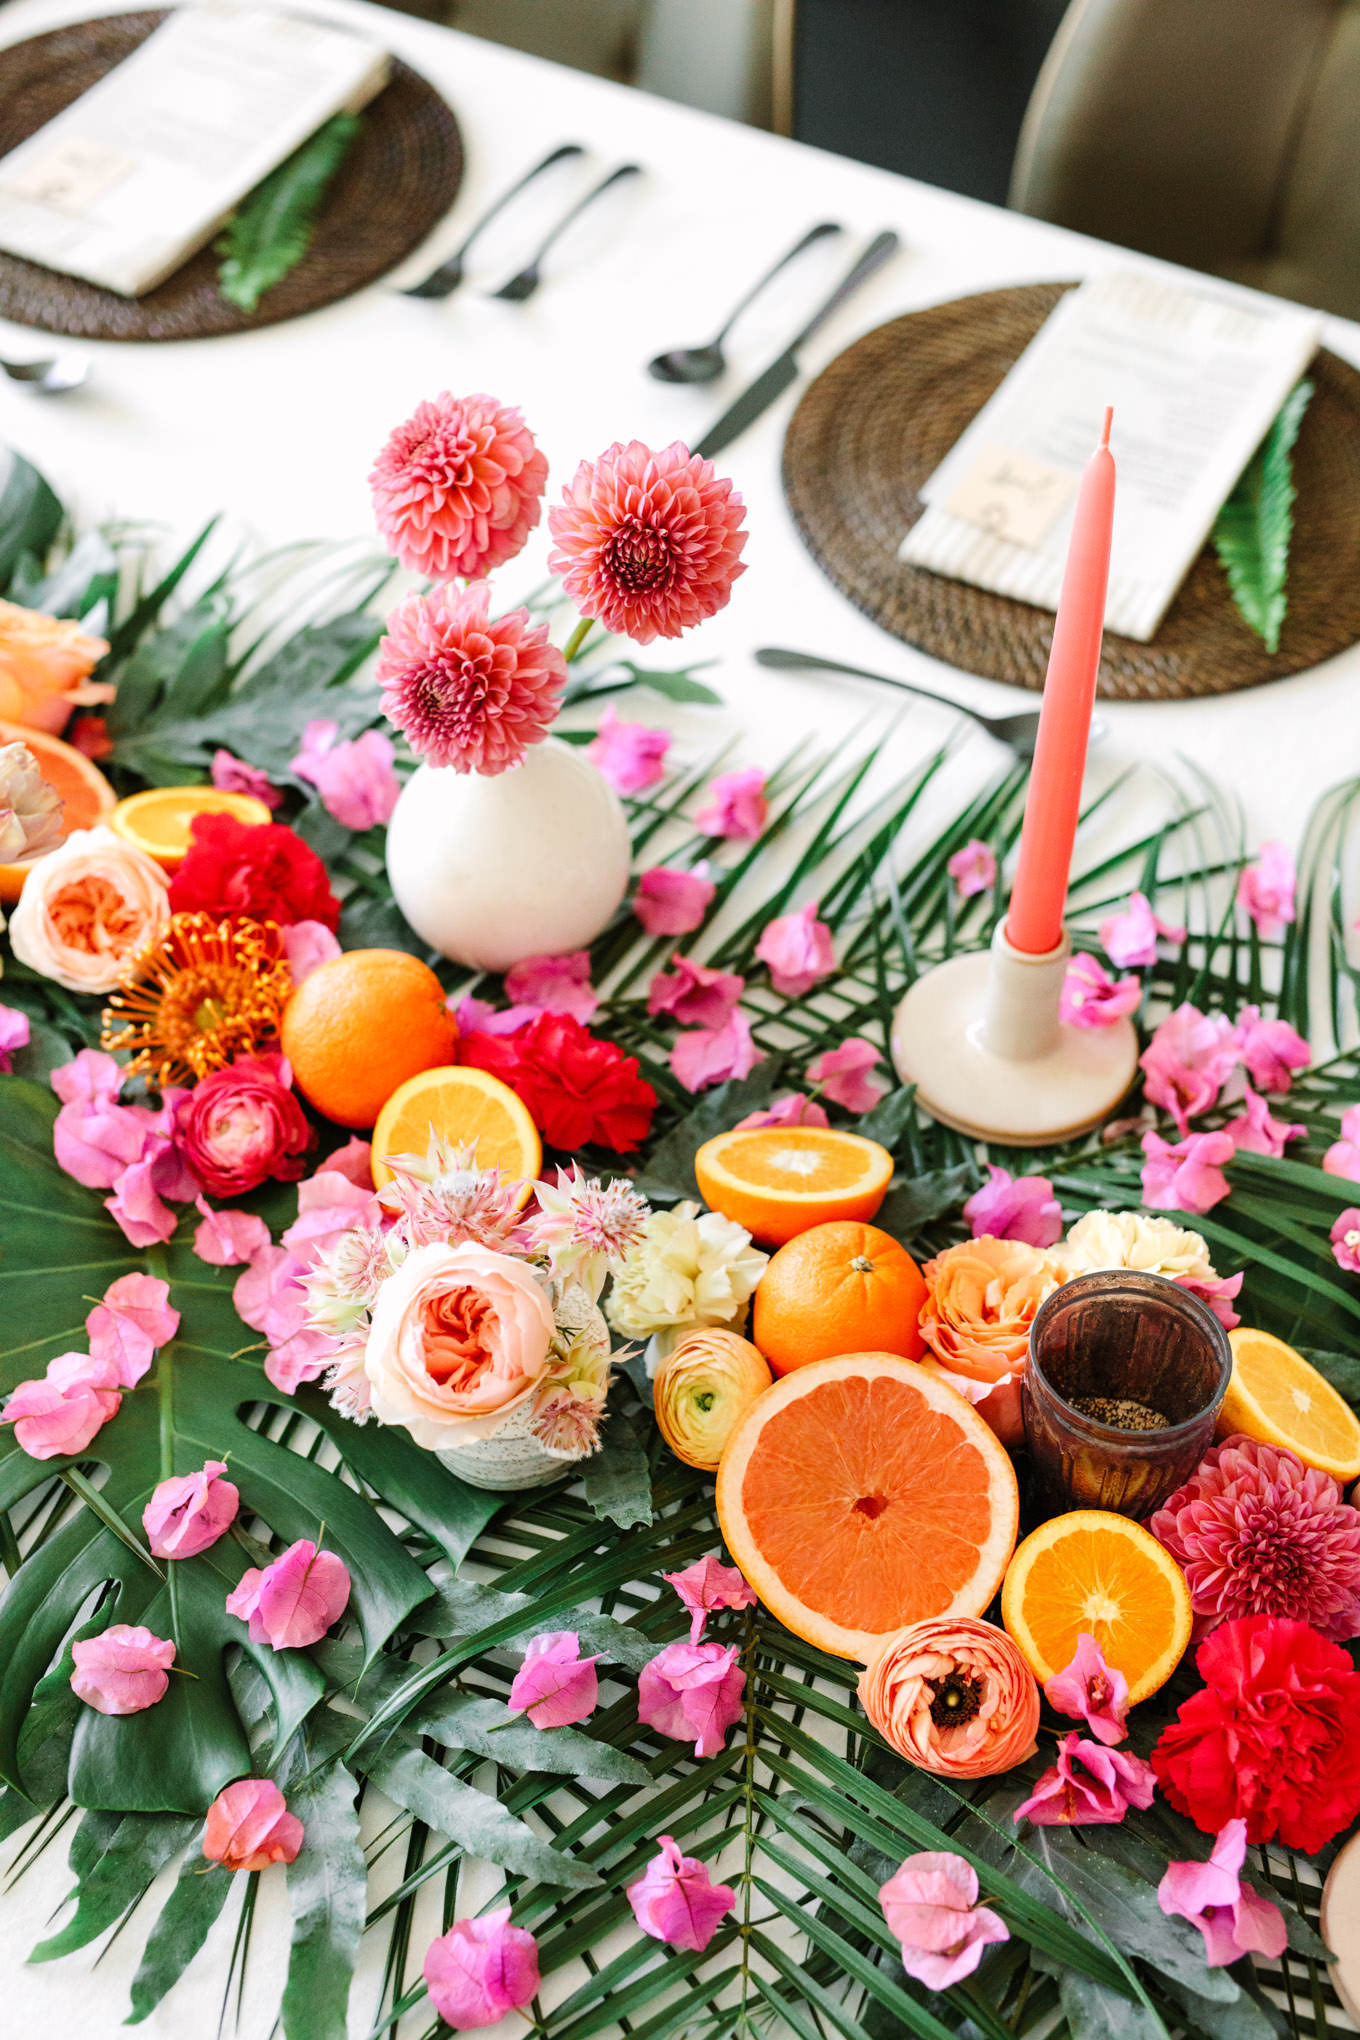 Colorful citrus table at Malibu microwedding | Engagement, elopement, and wedding photography roundup of Mary Costa’s favorite images from 2020 | Colorful and elevated photography for fun-loving couples in Southern California | #2020wedding #elopement #weddingphoto #weddingphotography #microwedding   Source: Mary Costa Photography | Los Angeles